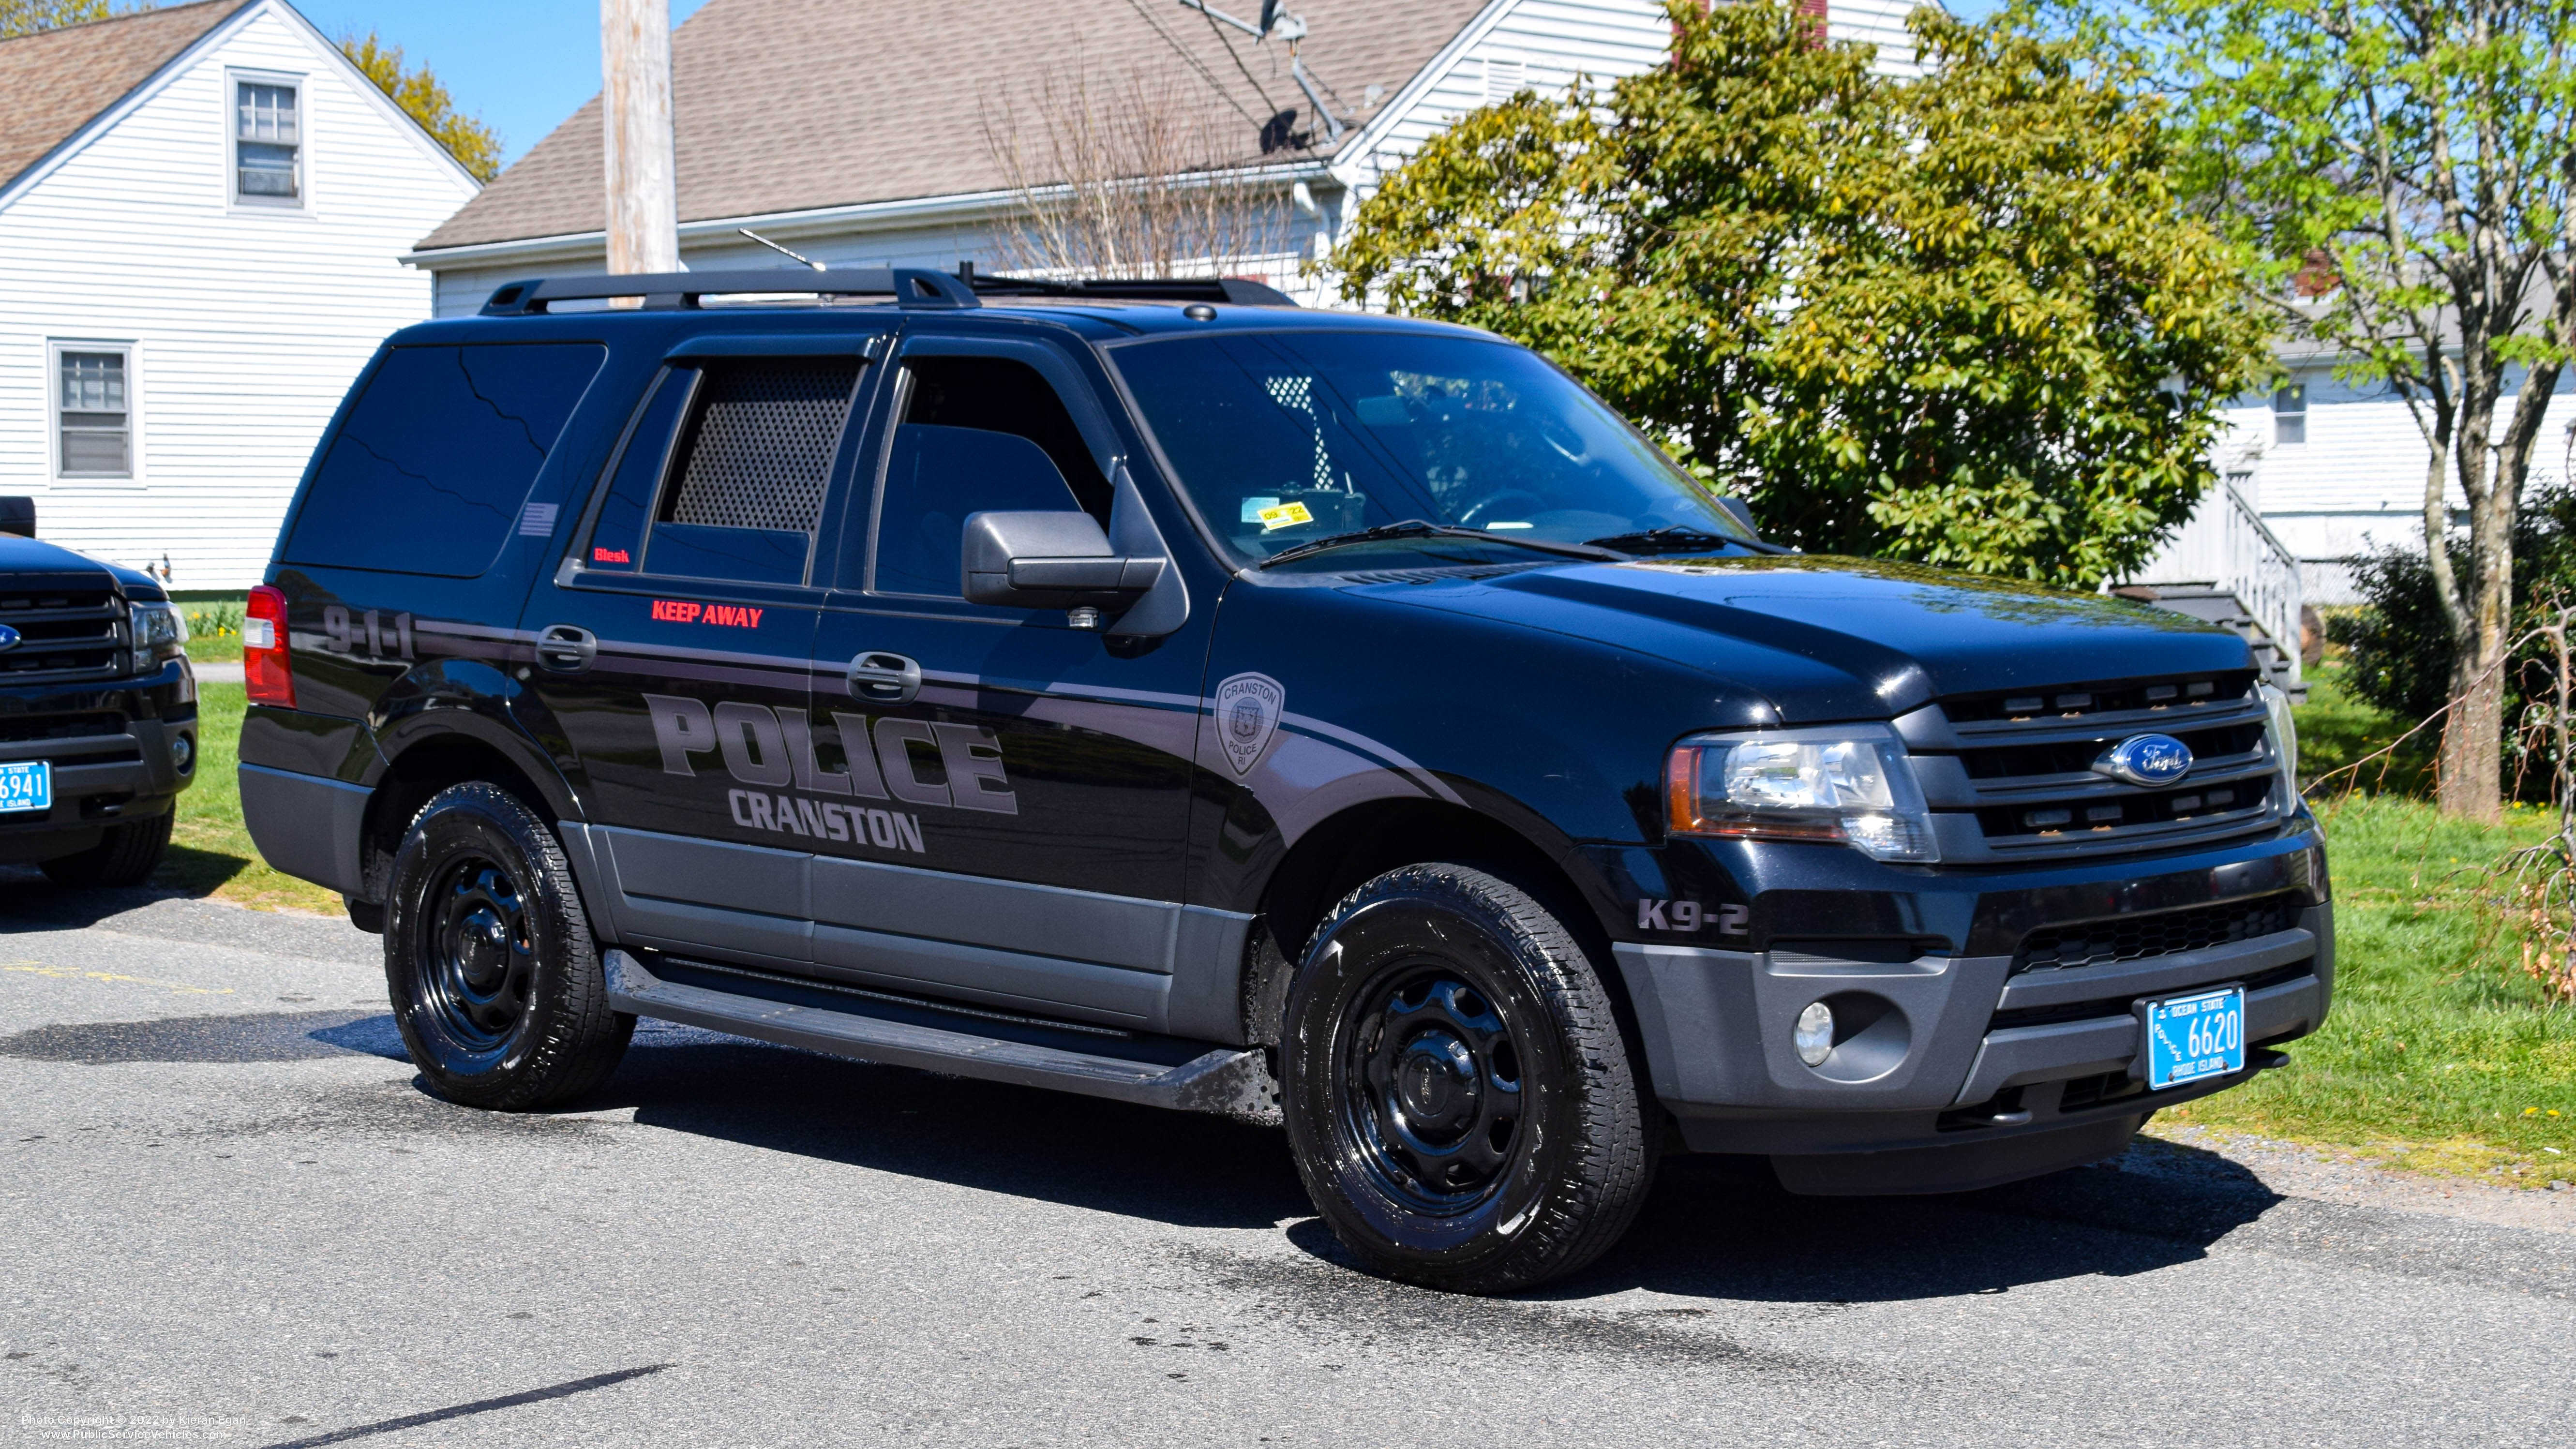 A photo  of Cranston Police
            K9-2, a 2016-2017 Ford Expedition             taken by Kieran Egan